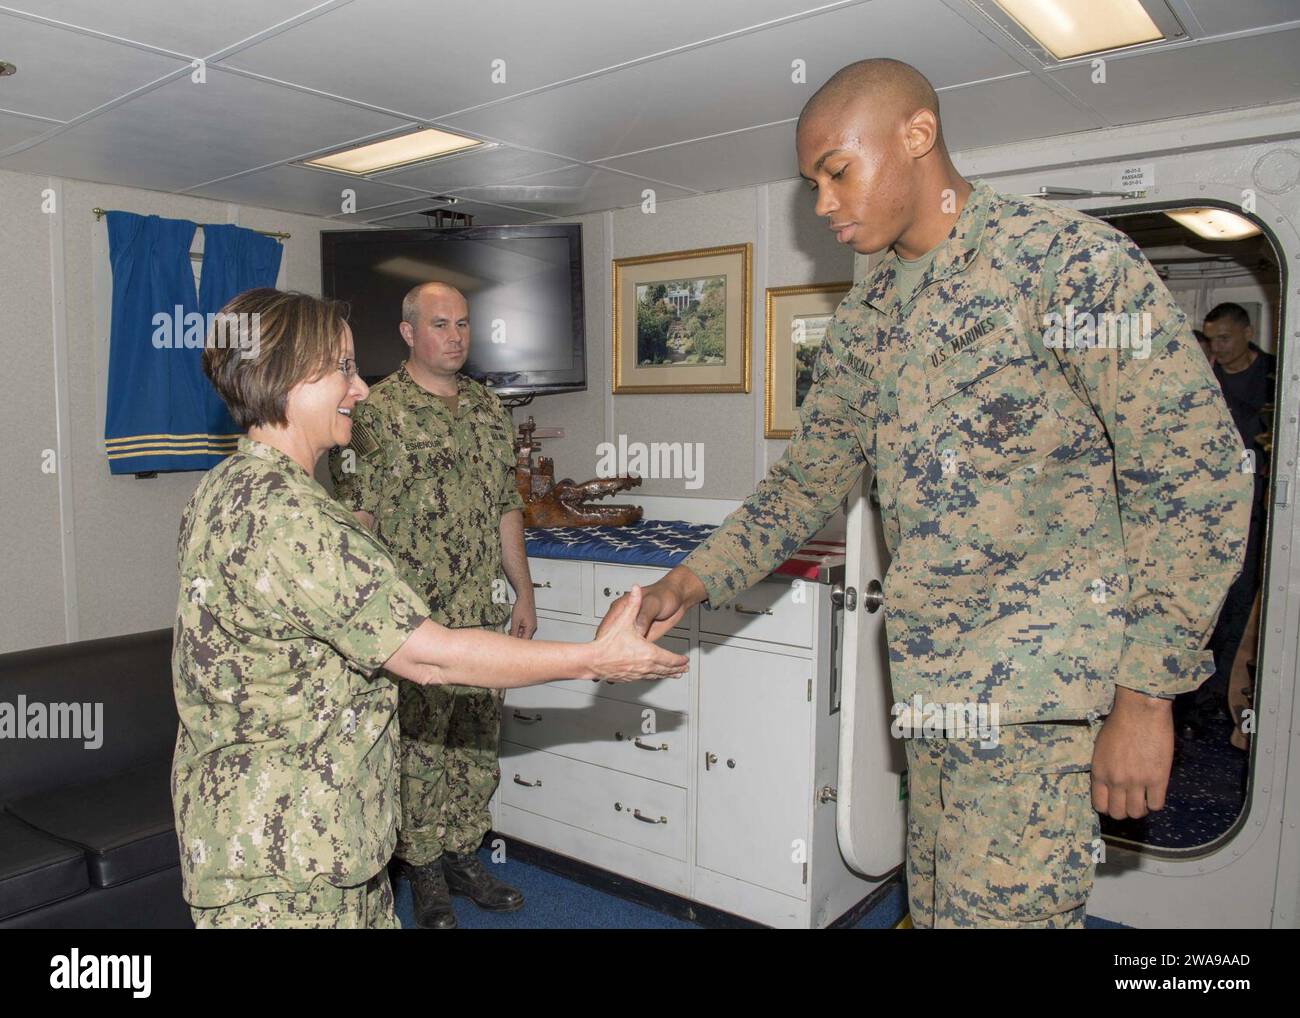 US military forces. 180604PC620-0769 BALTIC SEA (June 4, 2018) Cpl. Rael Pascall, assigned to the 26th Marine Expeditionary Unit, receives a coin from Vice Adm. Lisa M. Franchetti, commander of the U.S. 6th Fleet and commander of Naval Striking and Support Forces Nato, for being Marine in the spotlight aboard the Harpers Ferry-class dock landing ship USS Oak Hill (LSD 51), during BALTOPS 2018 June 4, 2018. BALTOPS is the premier annual maritime-focused exercise in the Baltic region and one of the largest exercises in Northern Europe enhancing flexibility and interoperability among allied and p Stock Photo